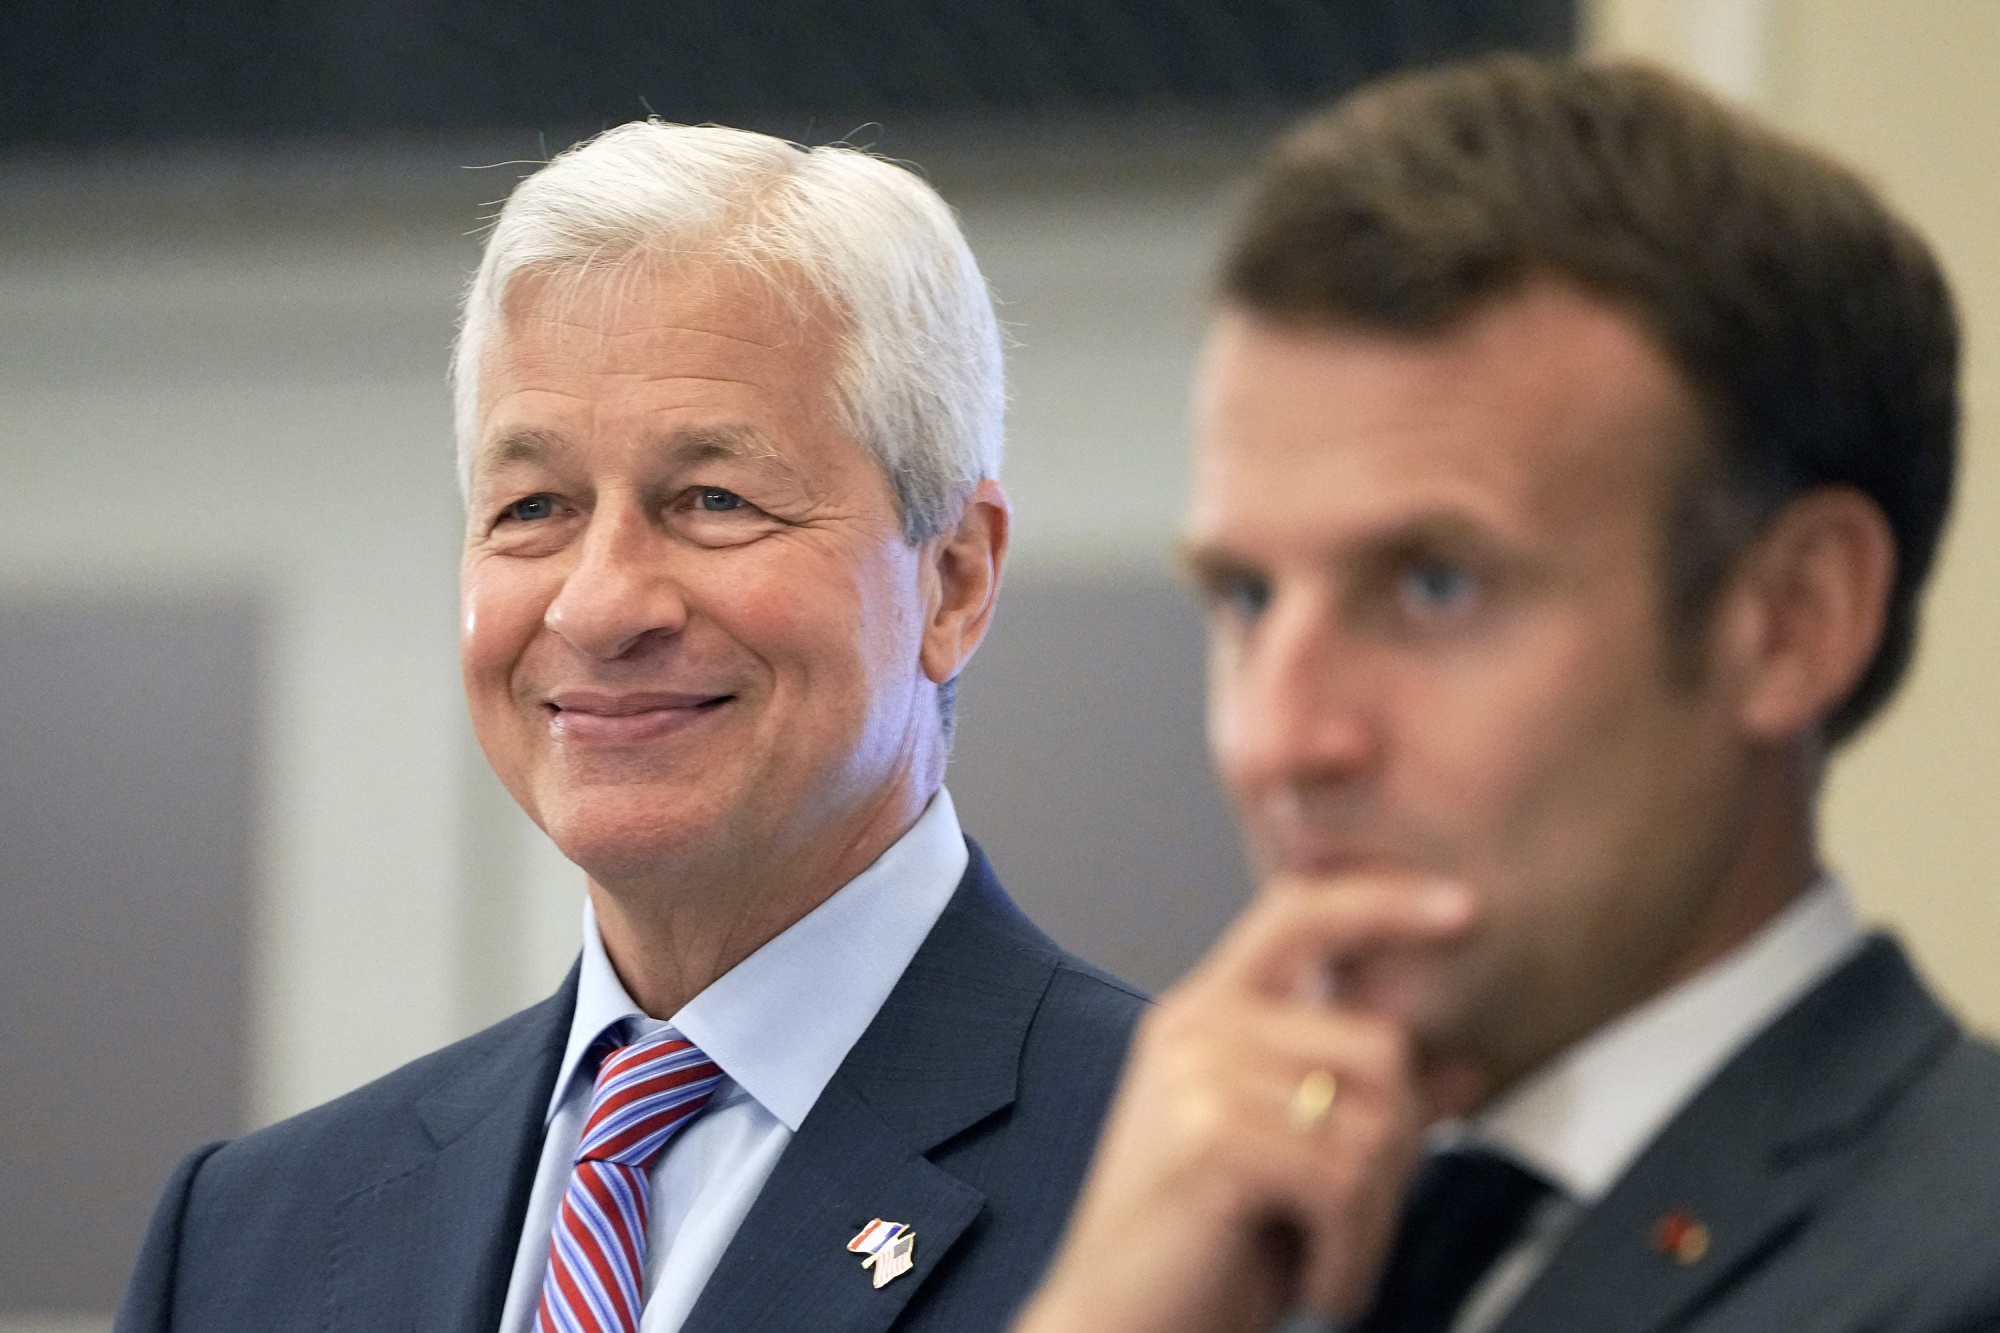 Jamie Dimon and Emmanuel Macron during the inauguration of JPMorgan Chase’s new headquarters Paris in 2021.